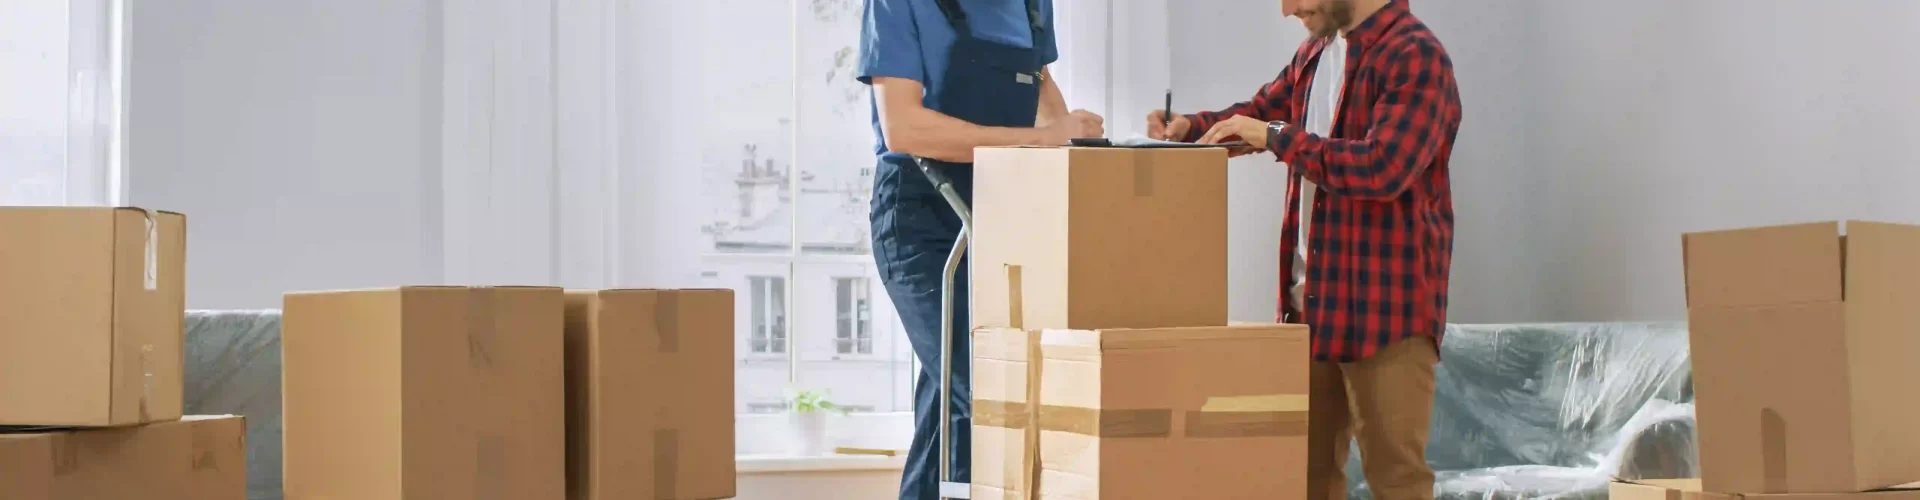 Best Moving Company in Pflugerville